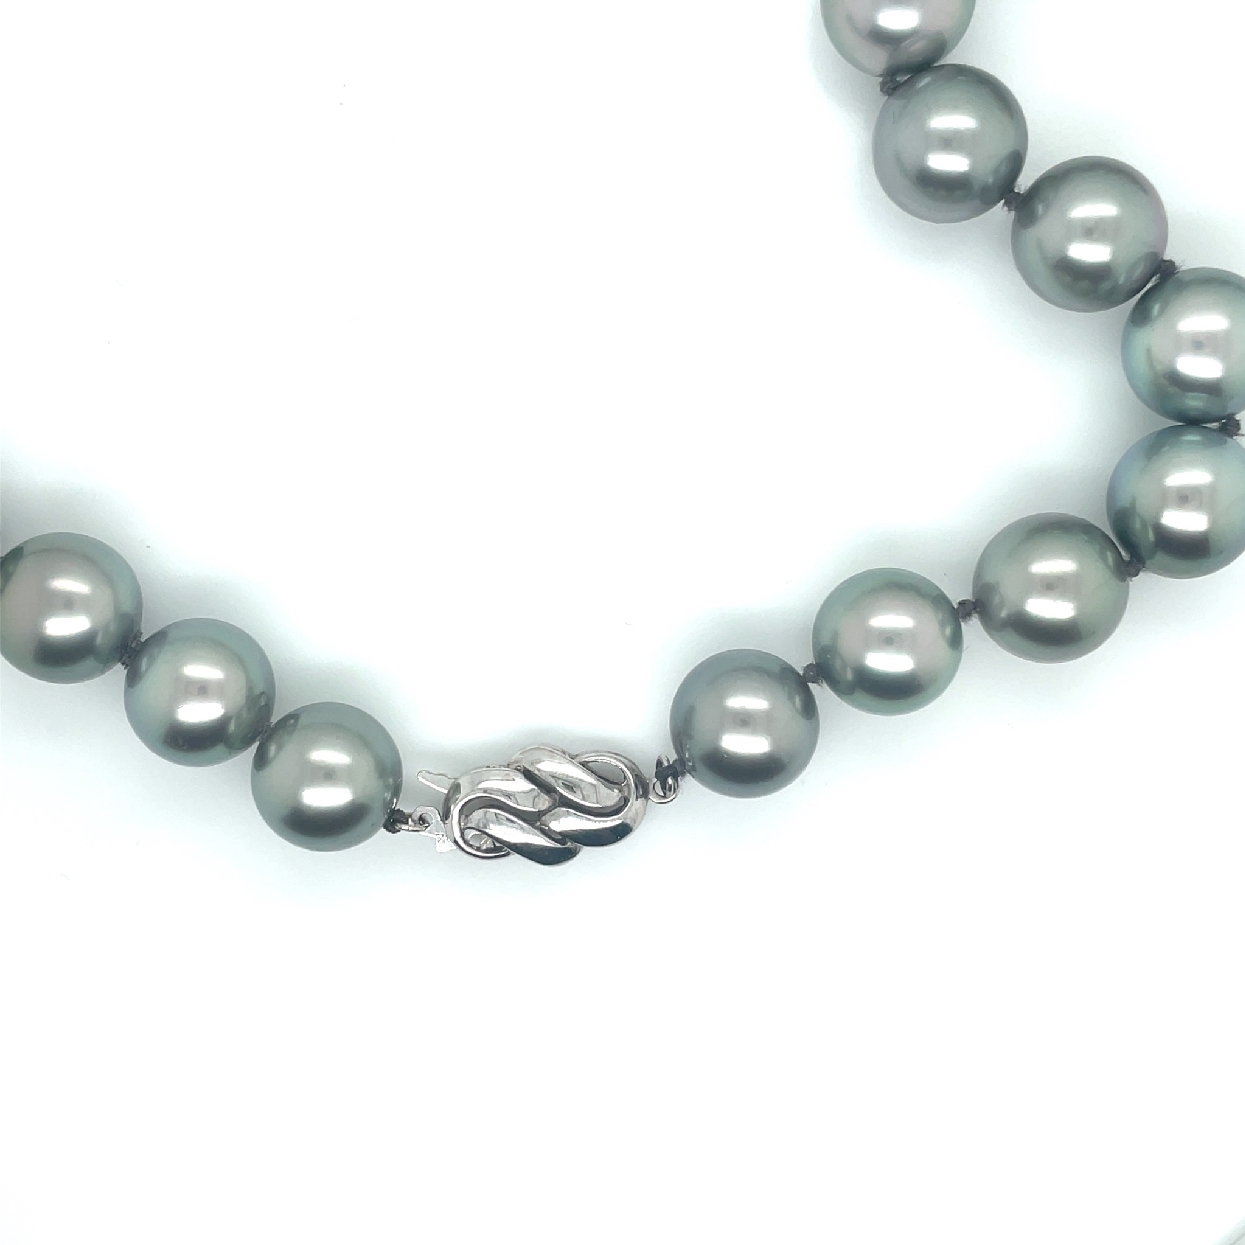 39 Single Strand Pearls with 18K White Gold Clasp